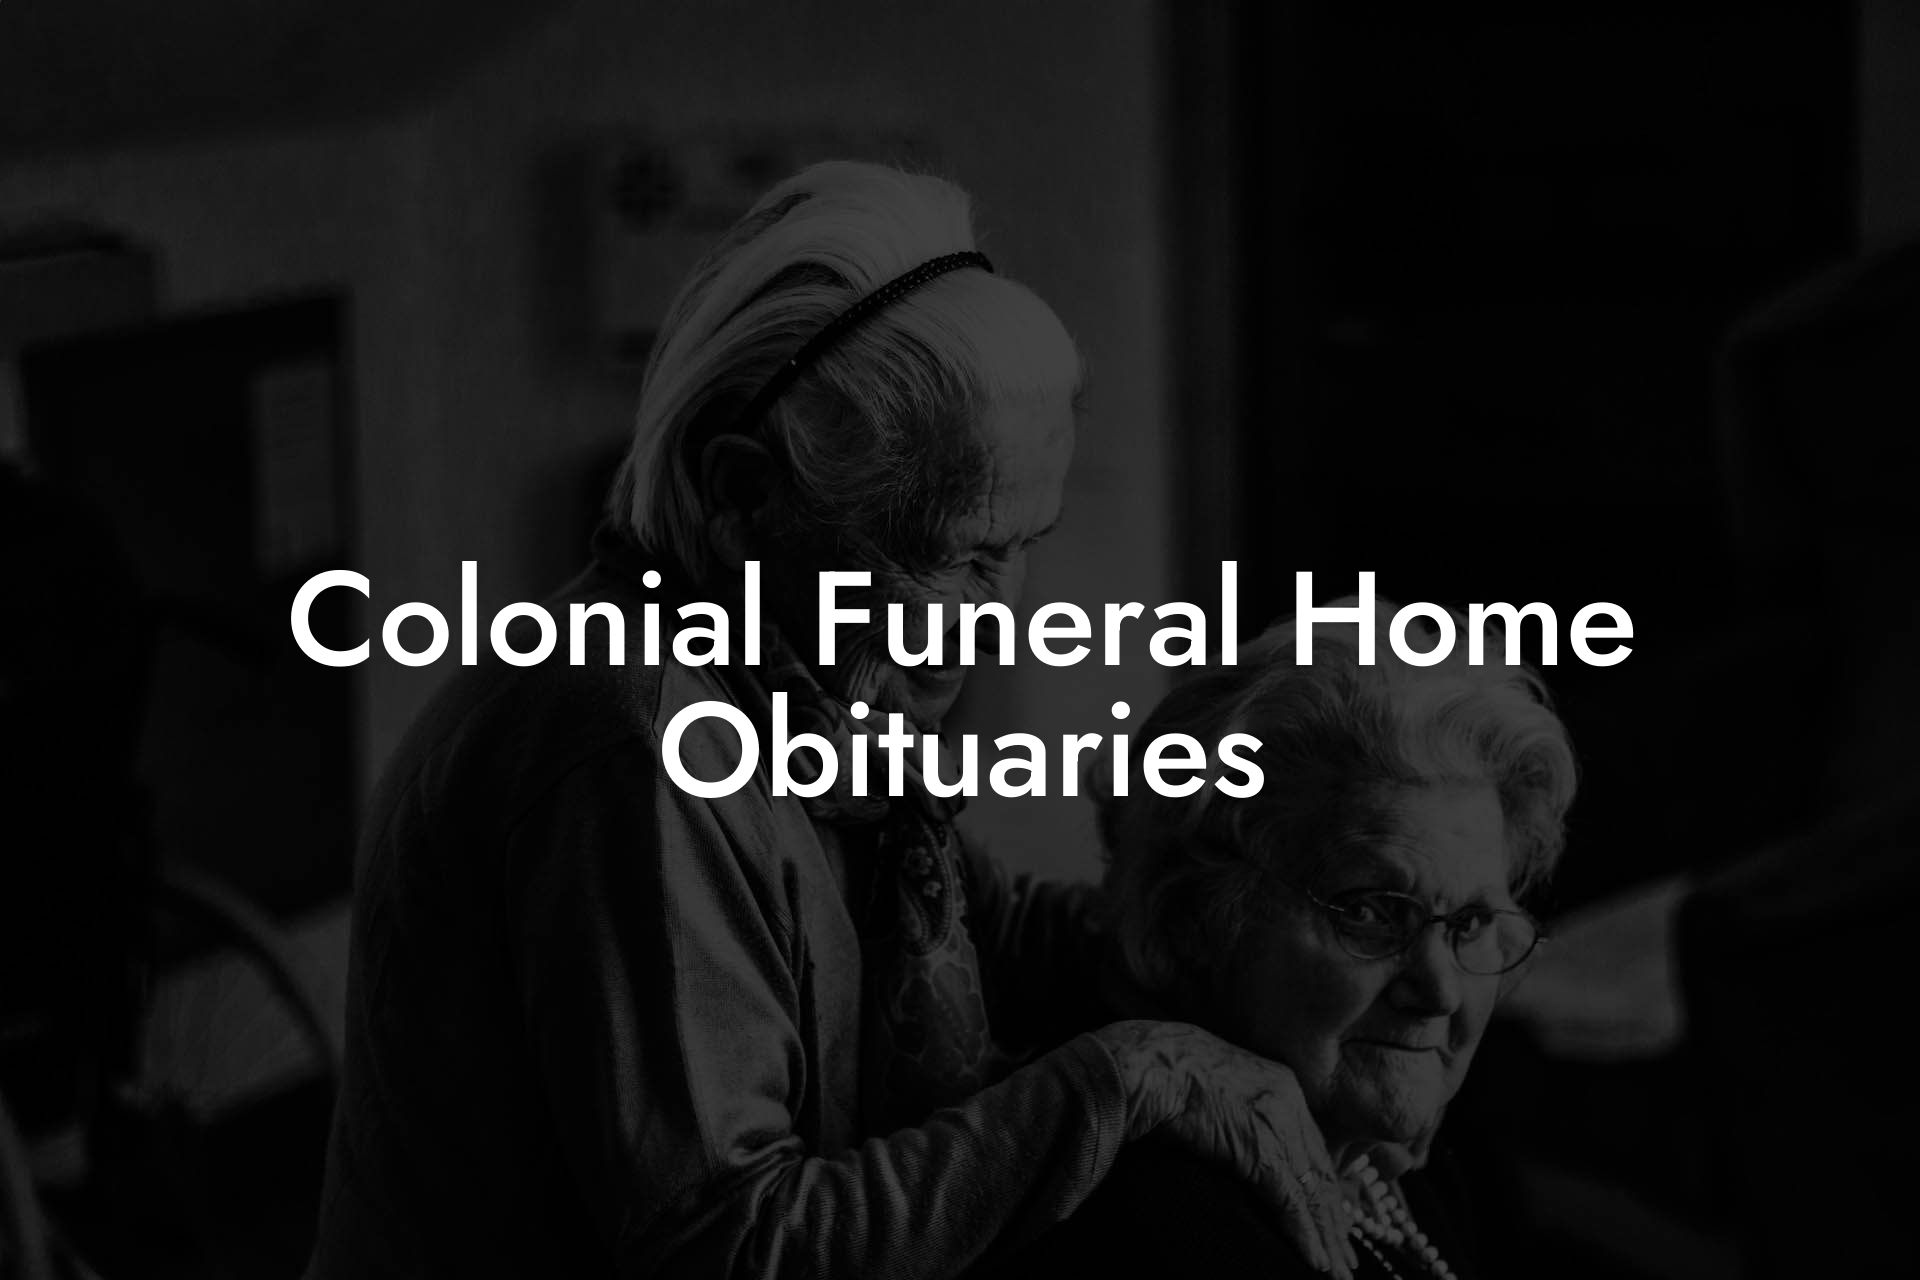 Colonial Funeral Home Obituaries